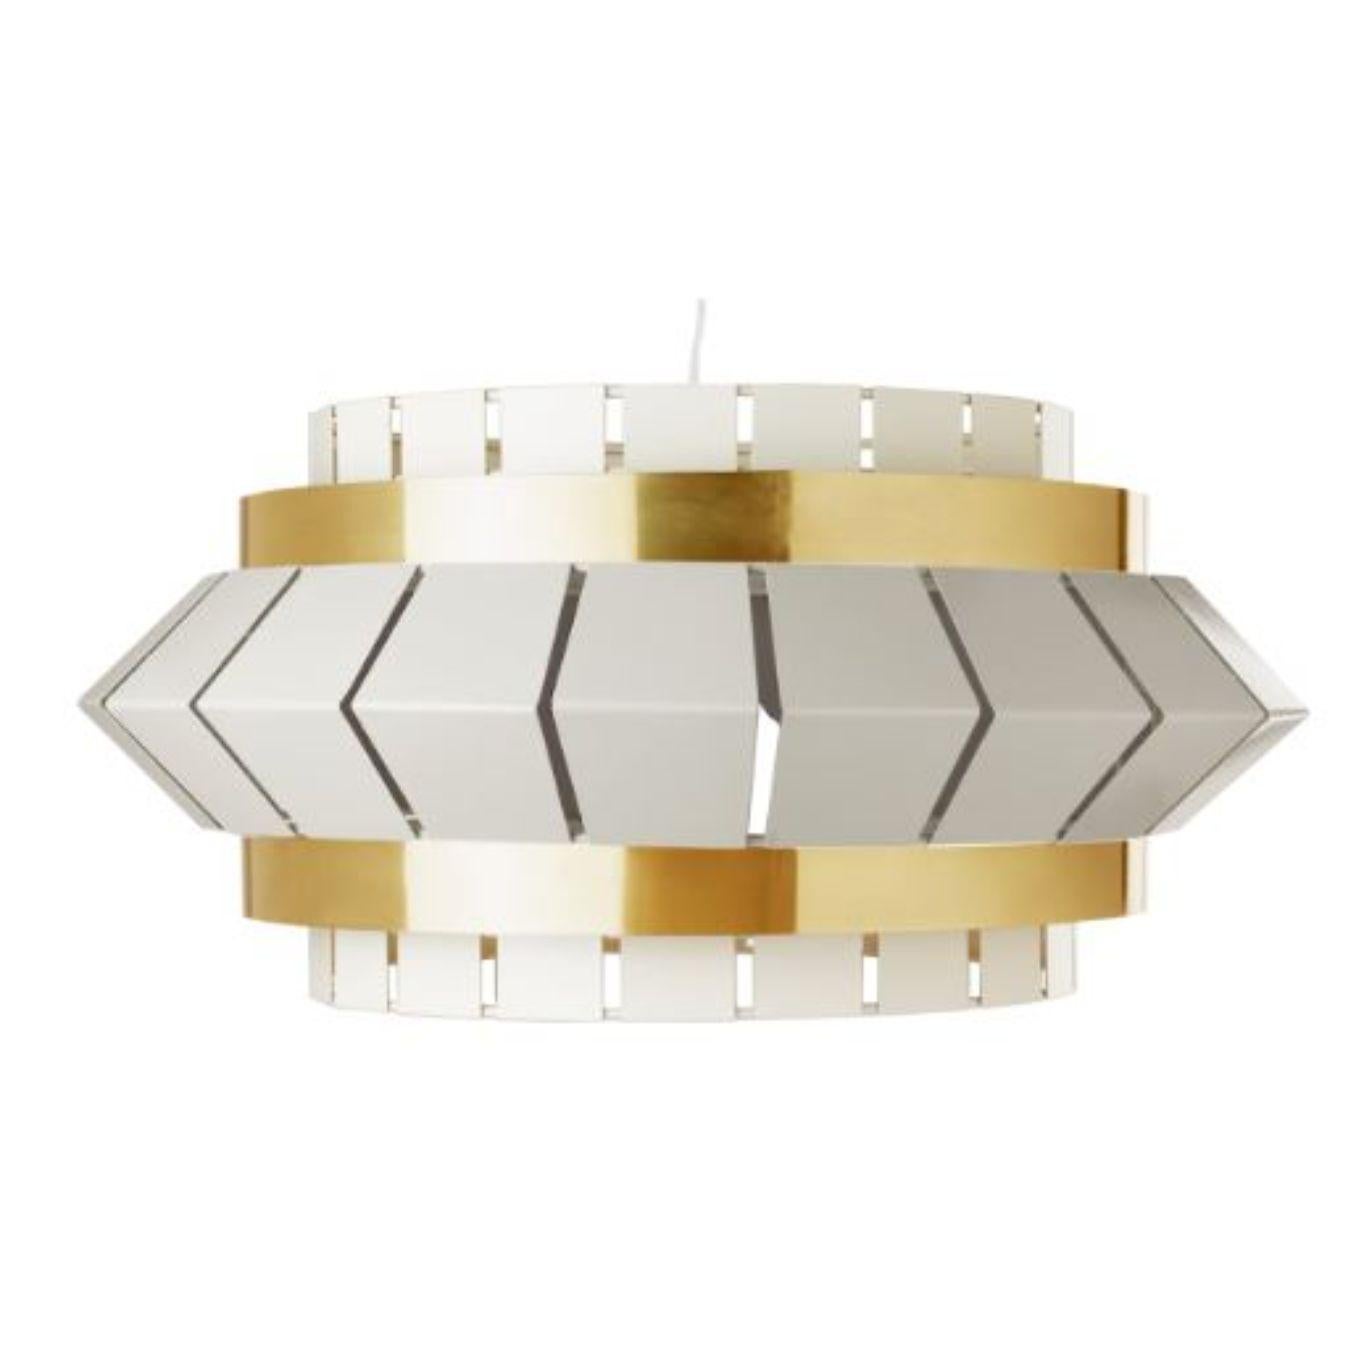 Ivory Comb I Suspension Lamp by Dooq For Sale 2